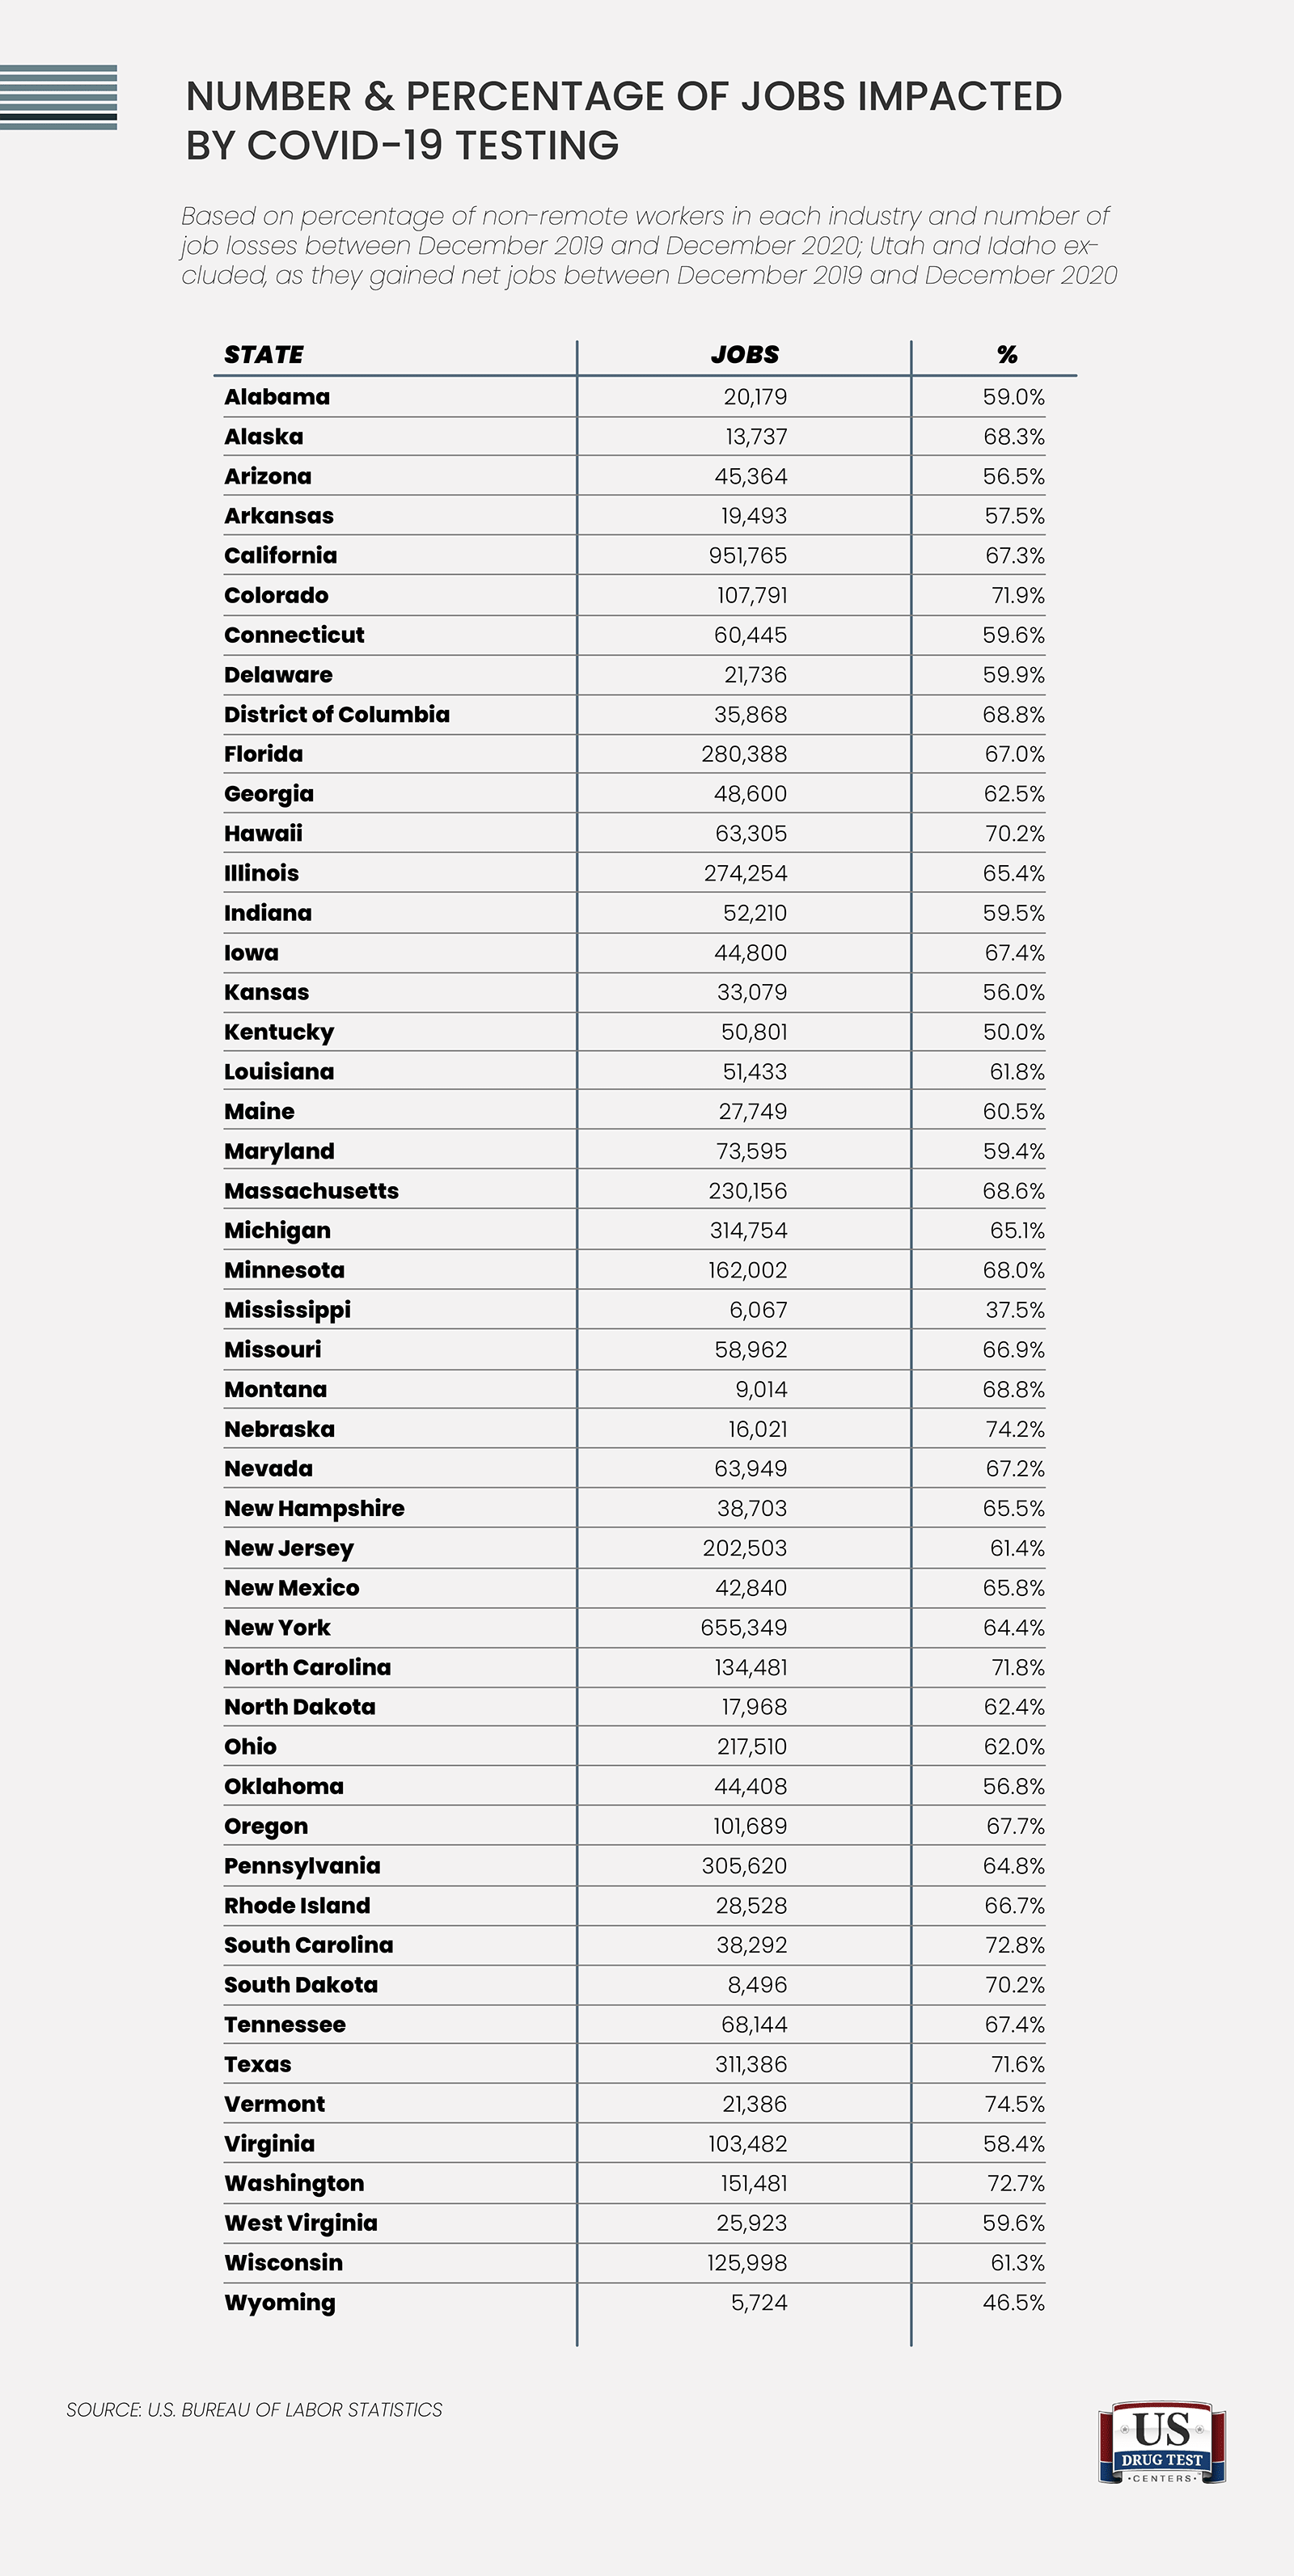 Number and percentage of jobs impacted by COVID-19 testing by state